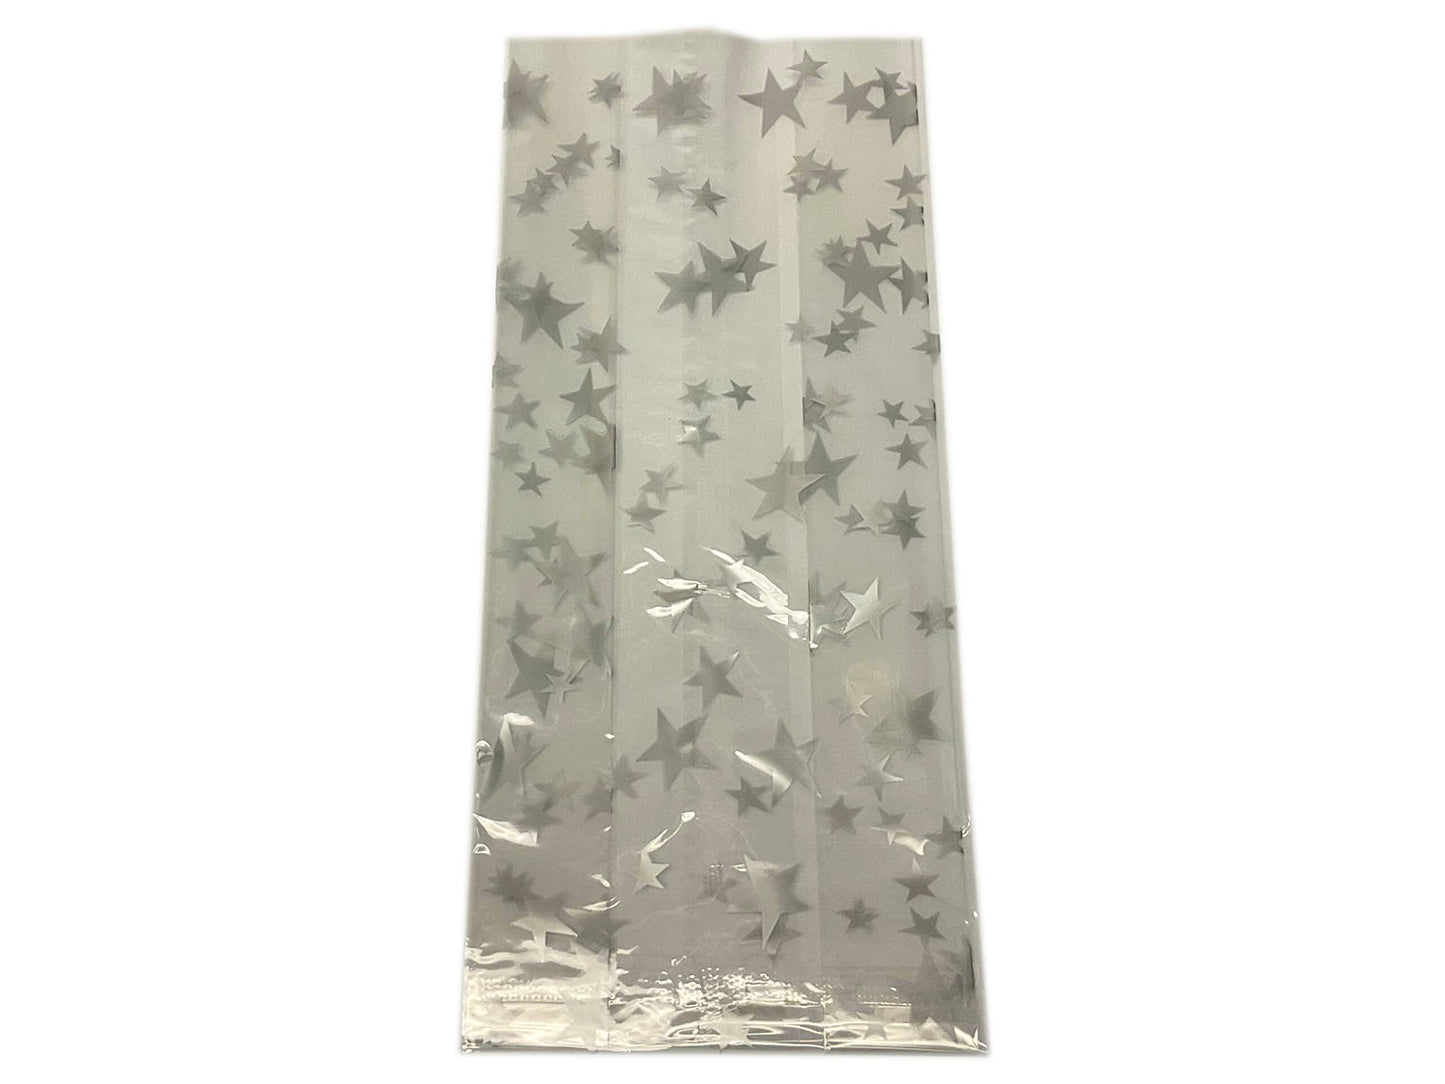 Party Favor Bag - Silver Stars